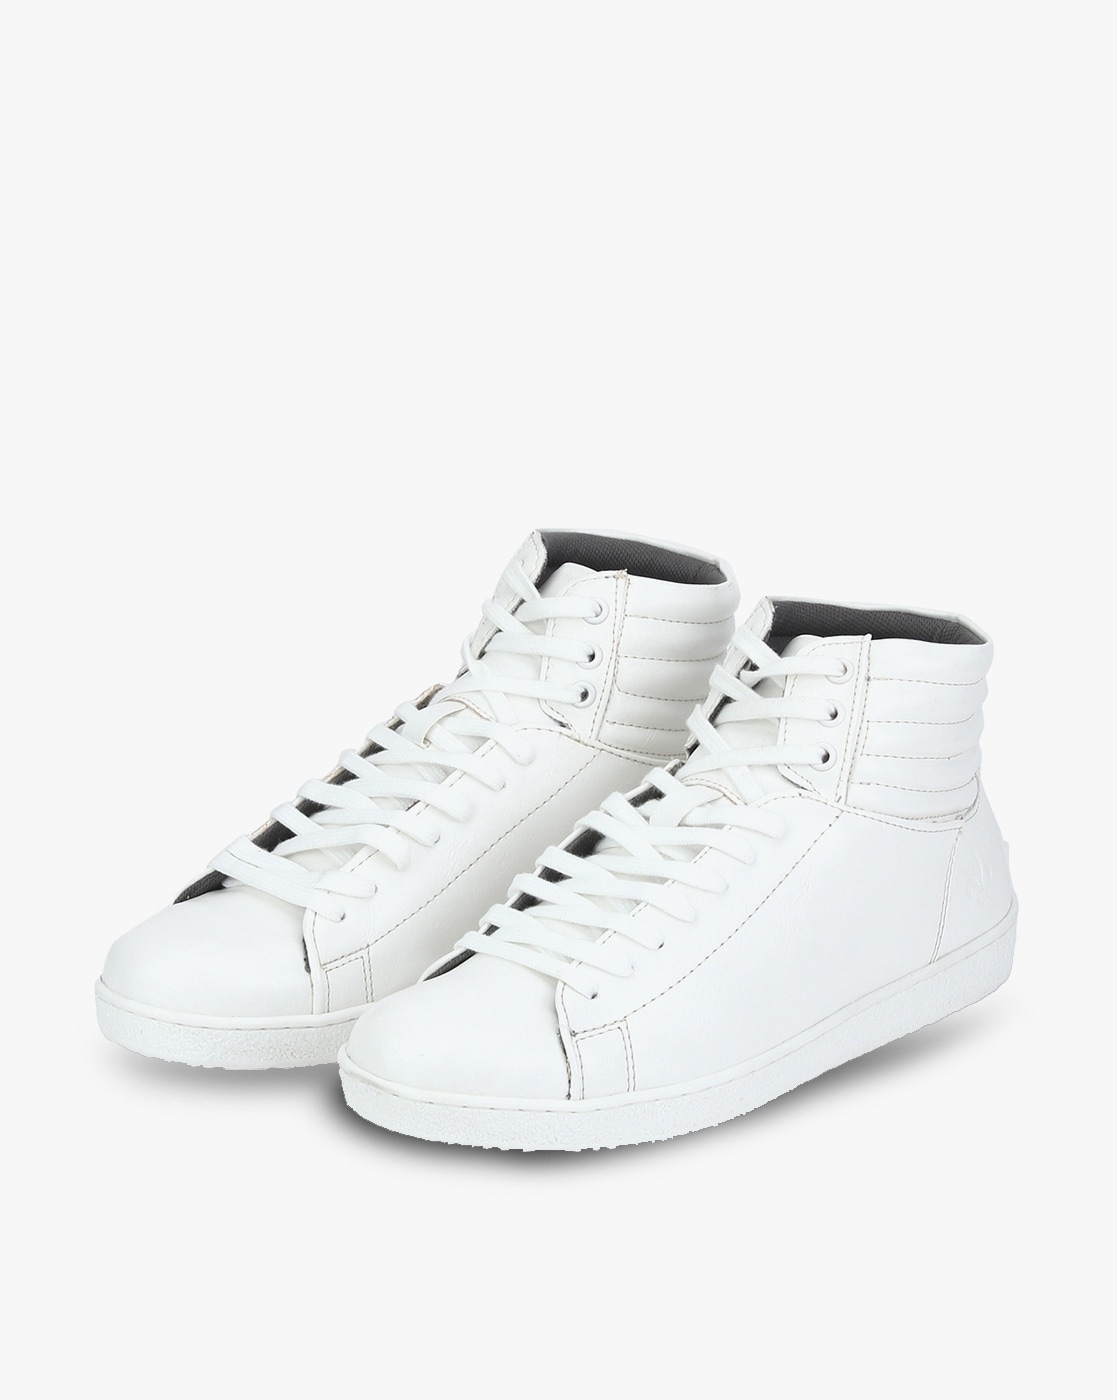 bond street by red tape white sneakers